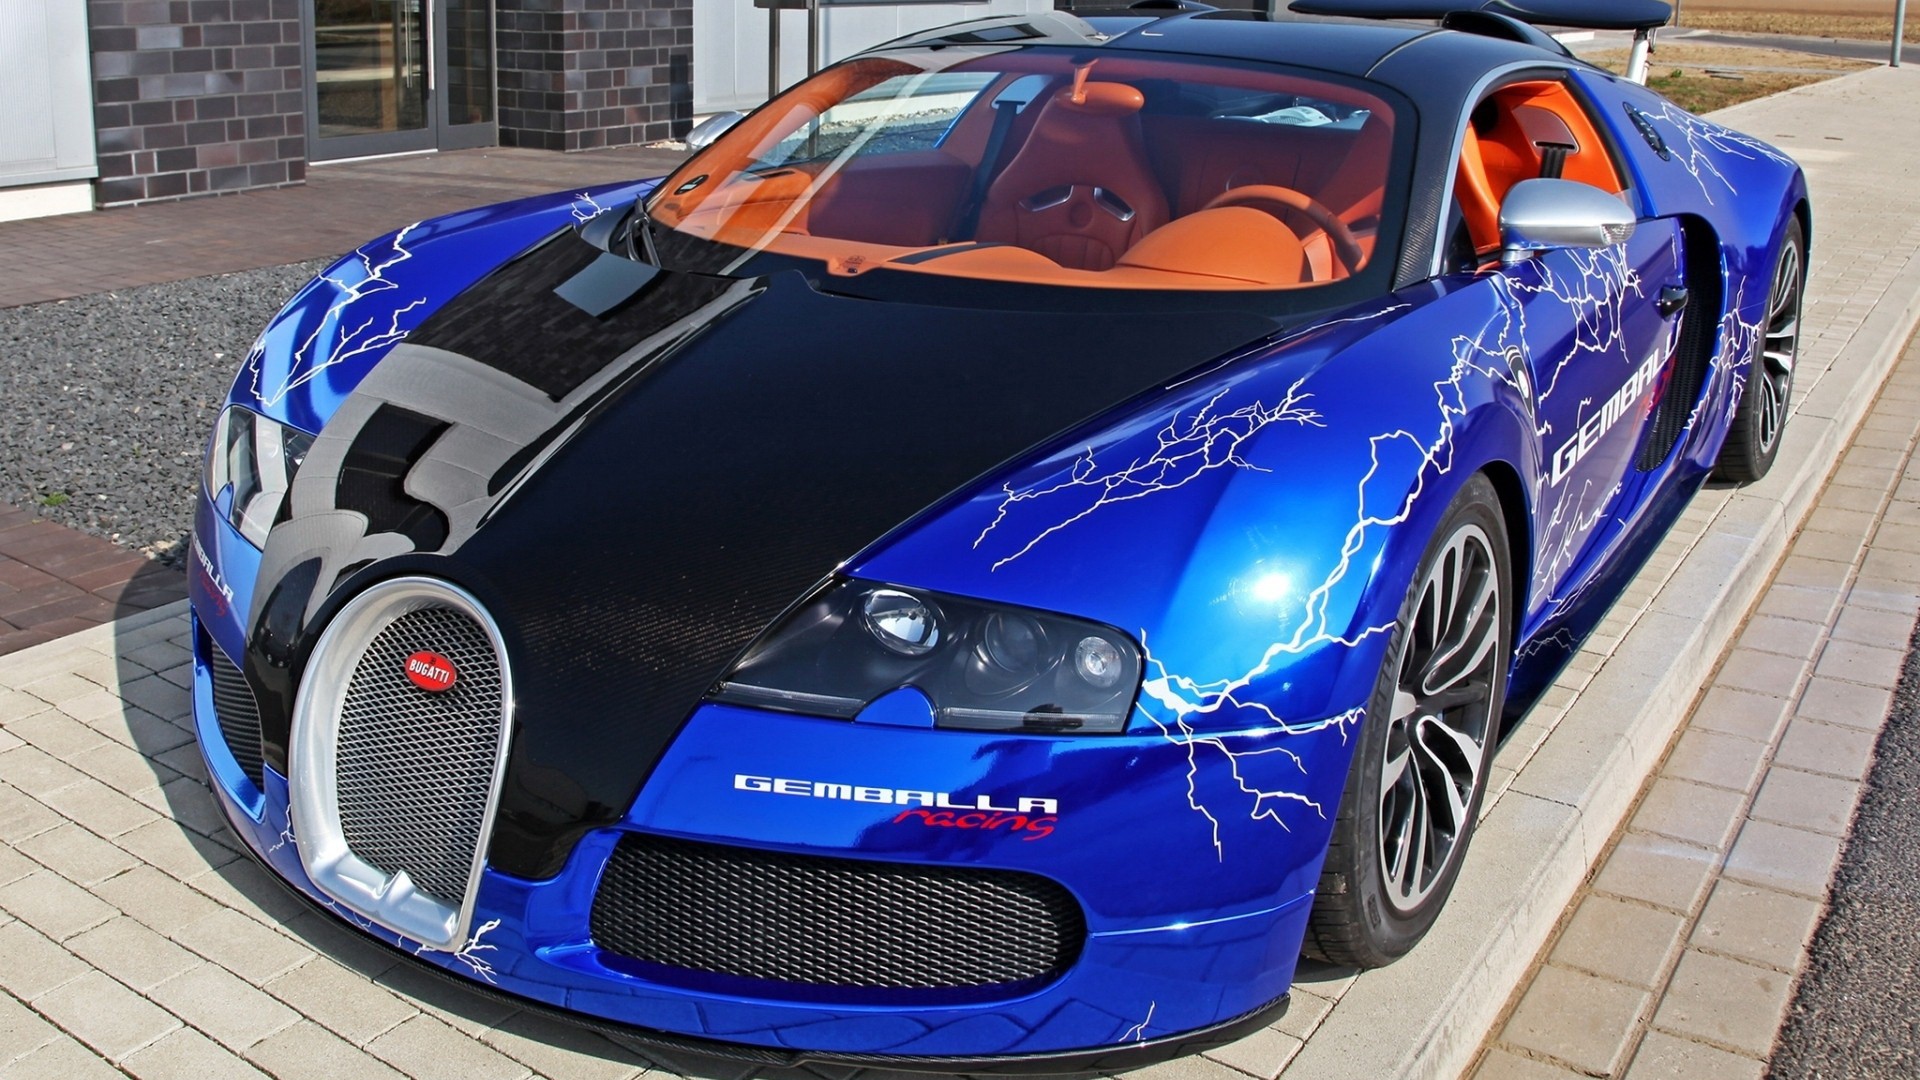 cars, Bugatti, Veyron, Vehicles, Wheels, Automobiles Wallpapers HD /  Desktop and Mobile Backgrounds